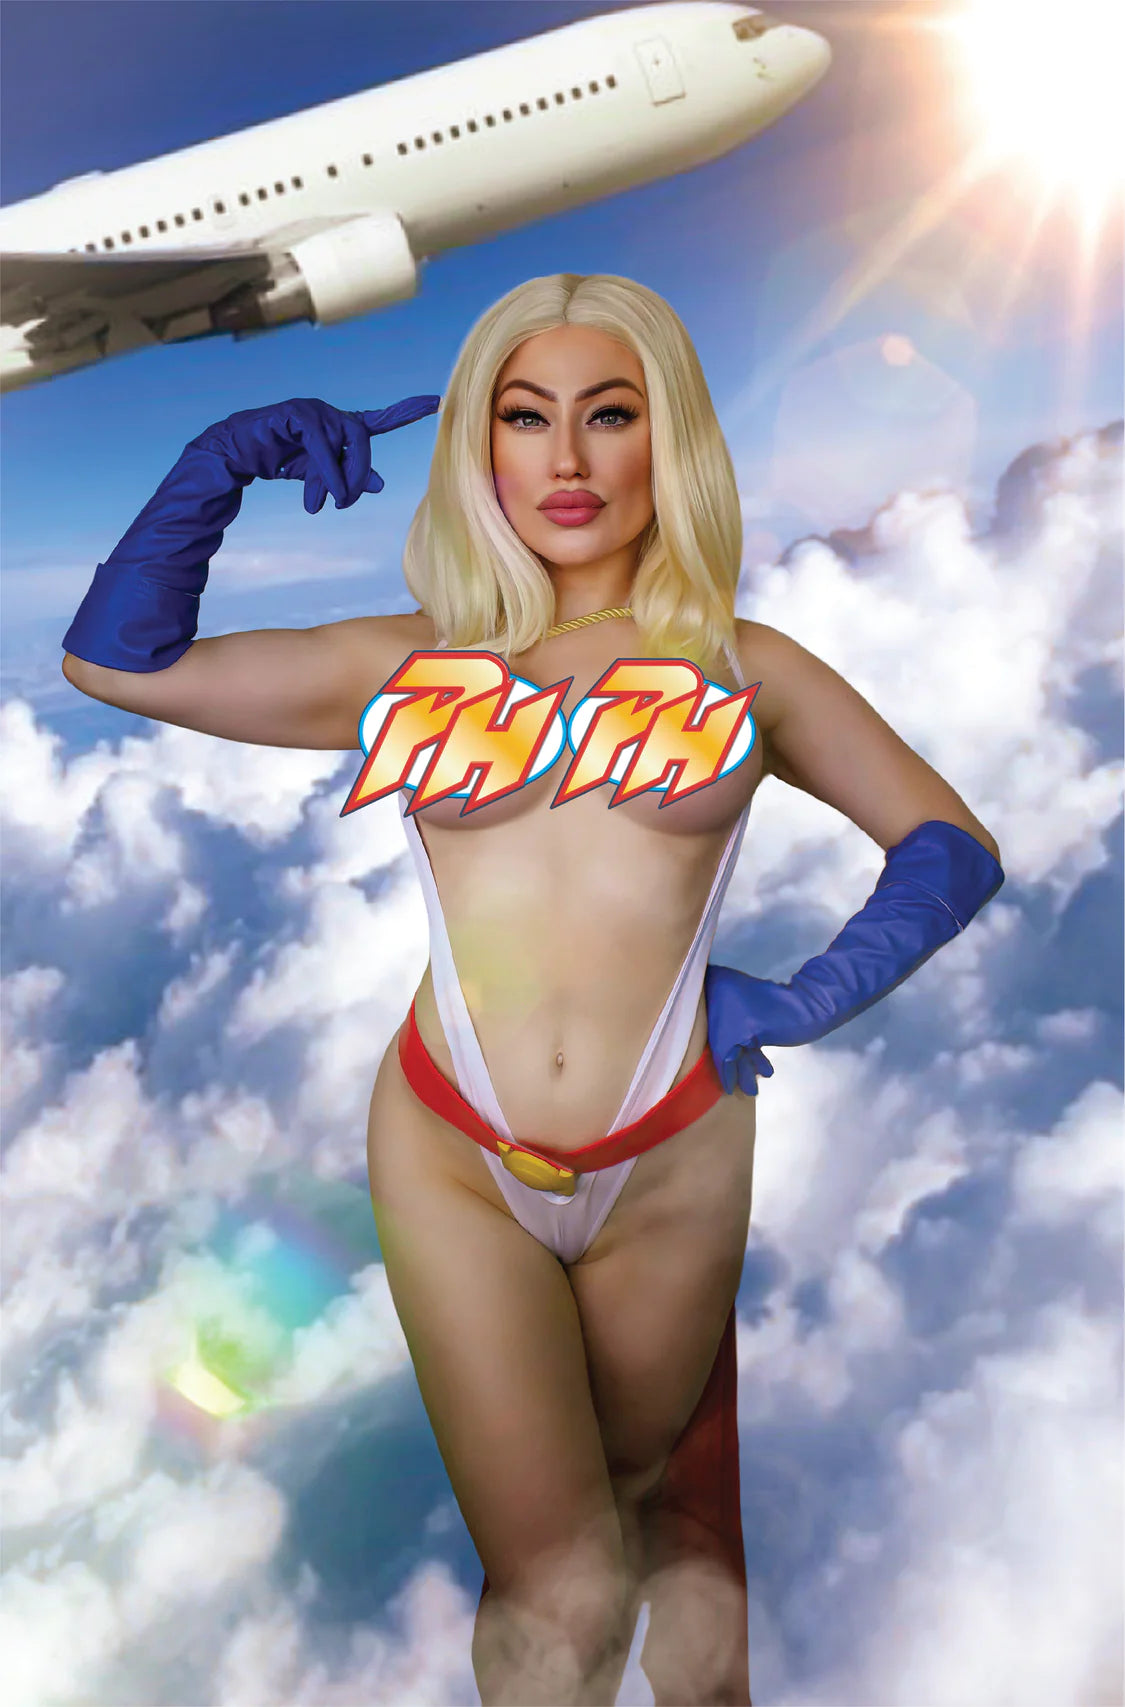 POWER HOUR #2 - RACHIE HOLLON POWER GIRL COSPLAY- MEGACON EXCLUSIVE NAUGHTY - LTD 50 (FREE TOPLOADER)